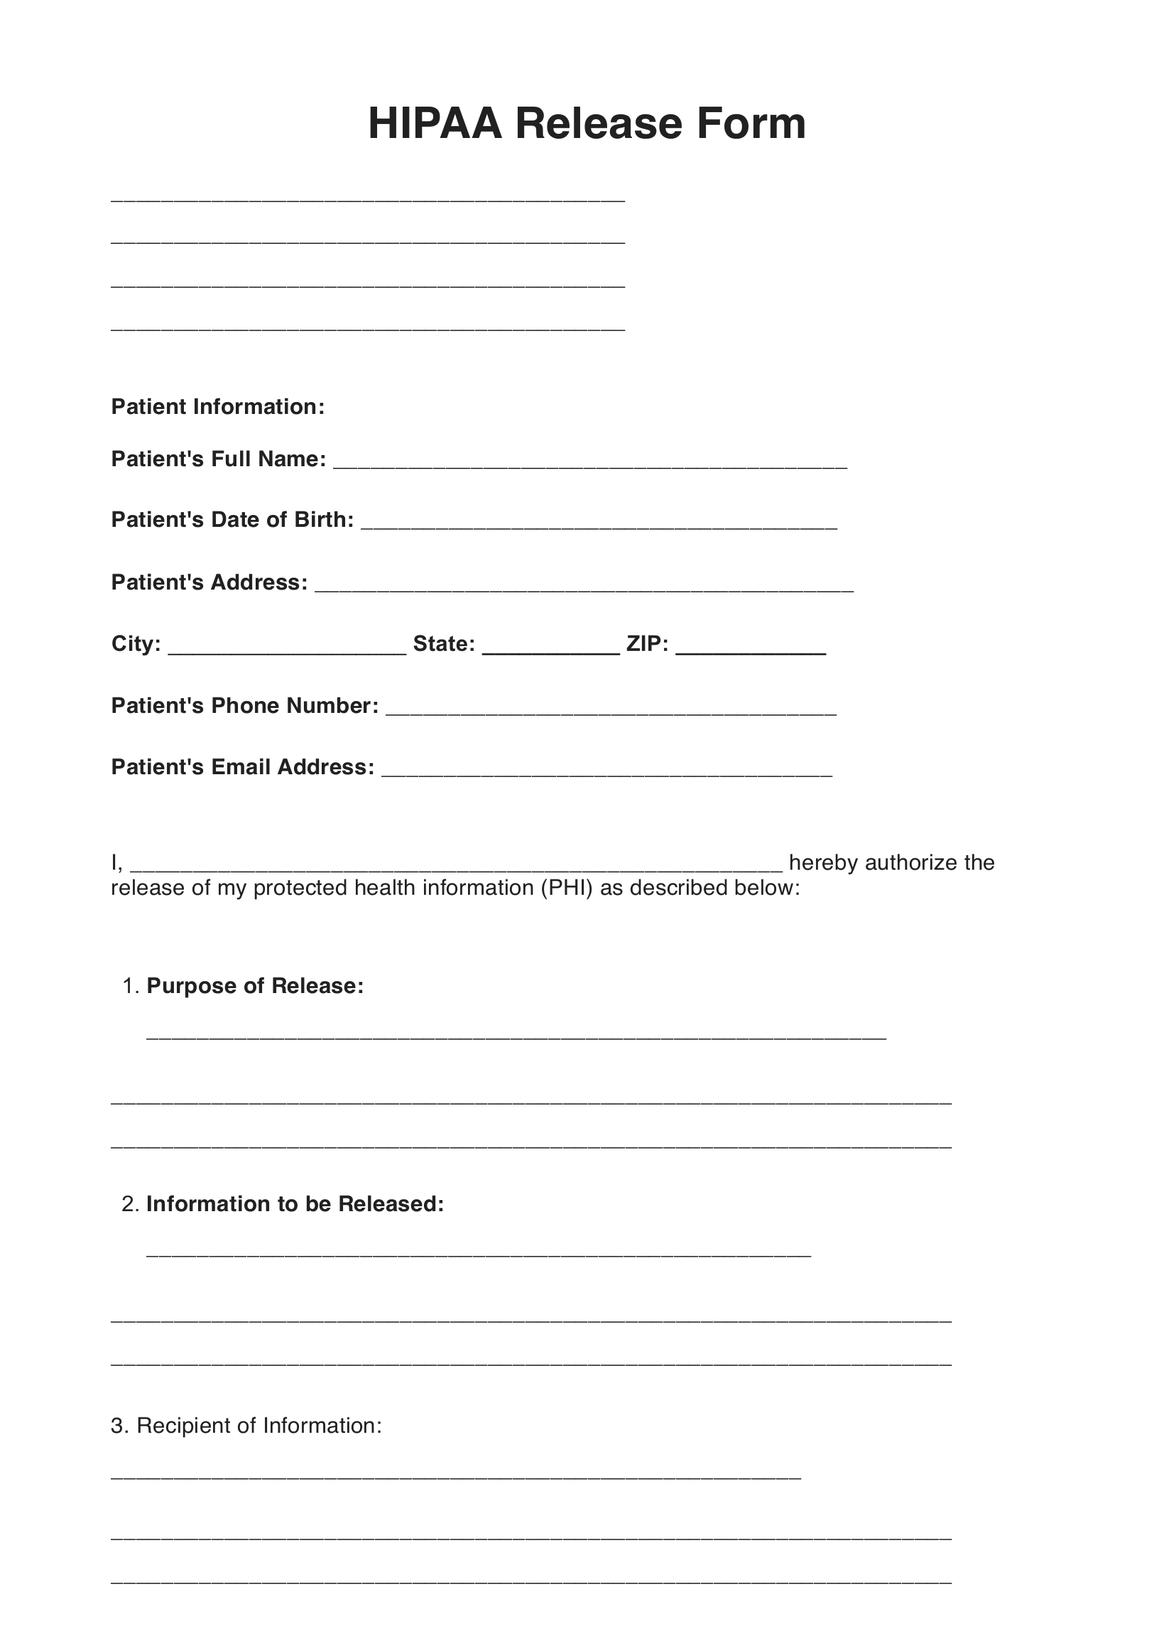 HIPAA Release Form PDF Example